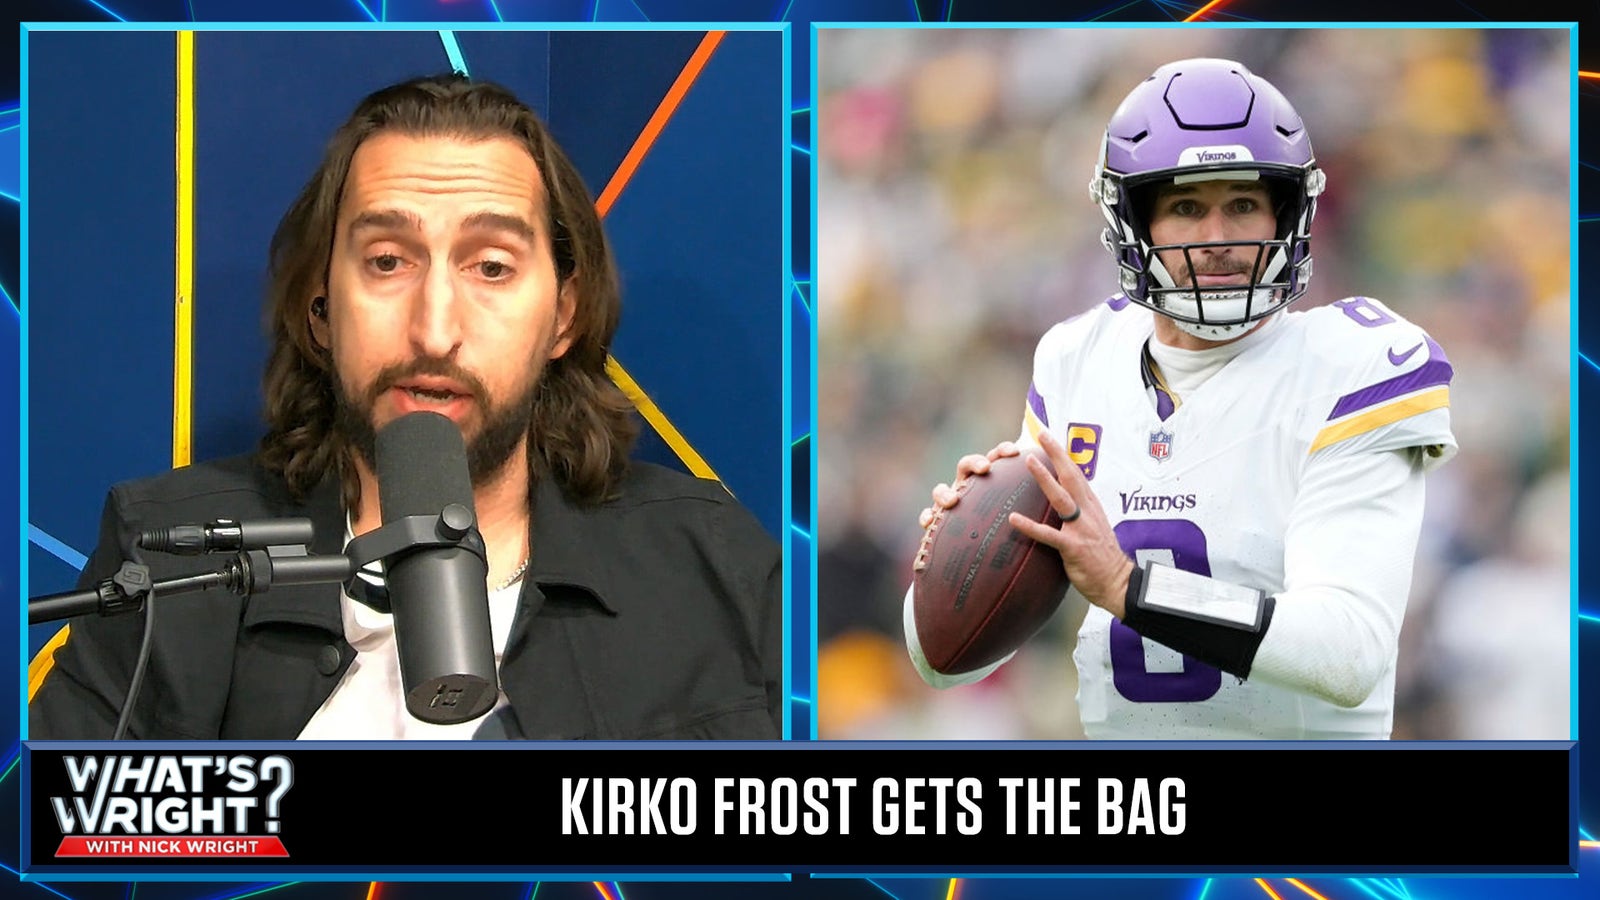 Nick Wright tips his cap to Kirk Cousins for his big payday